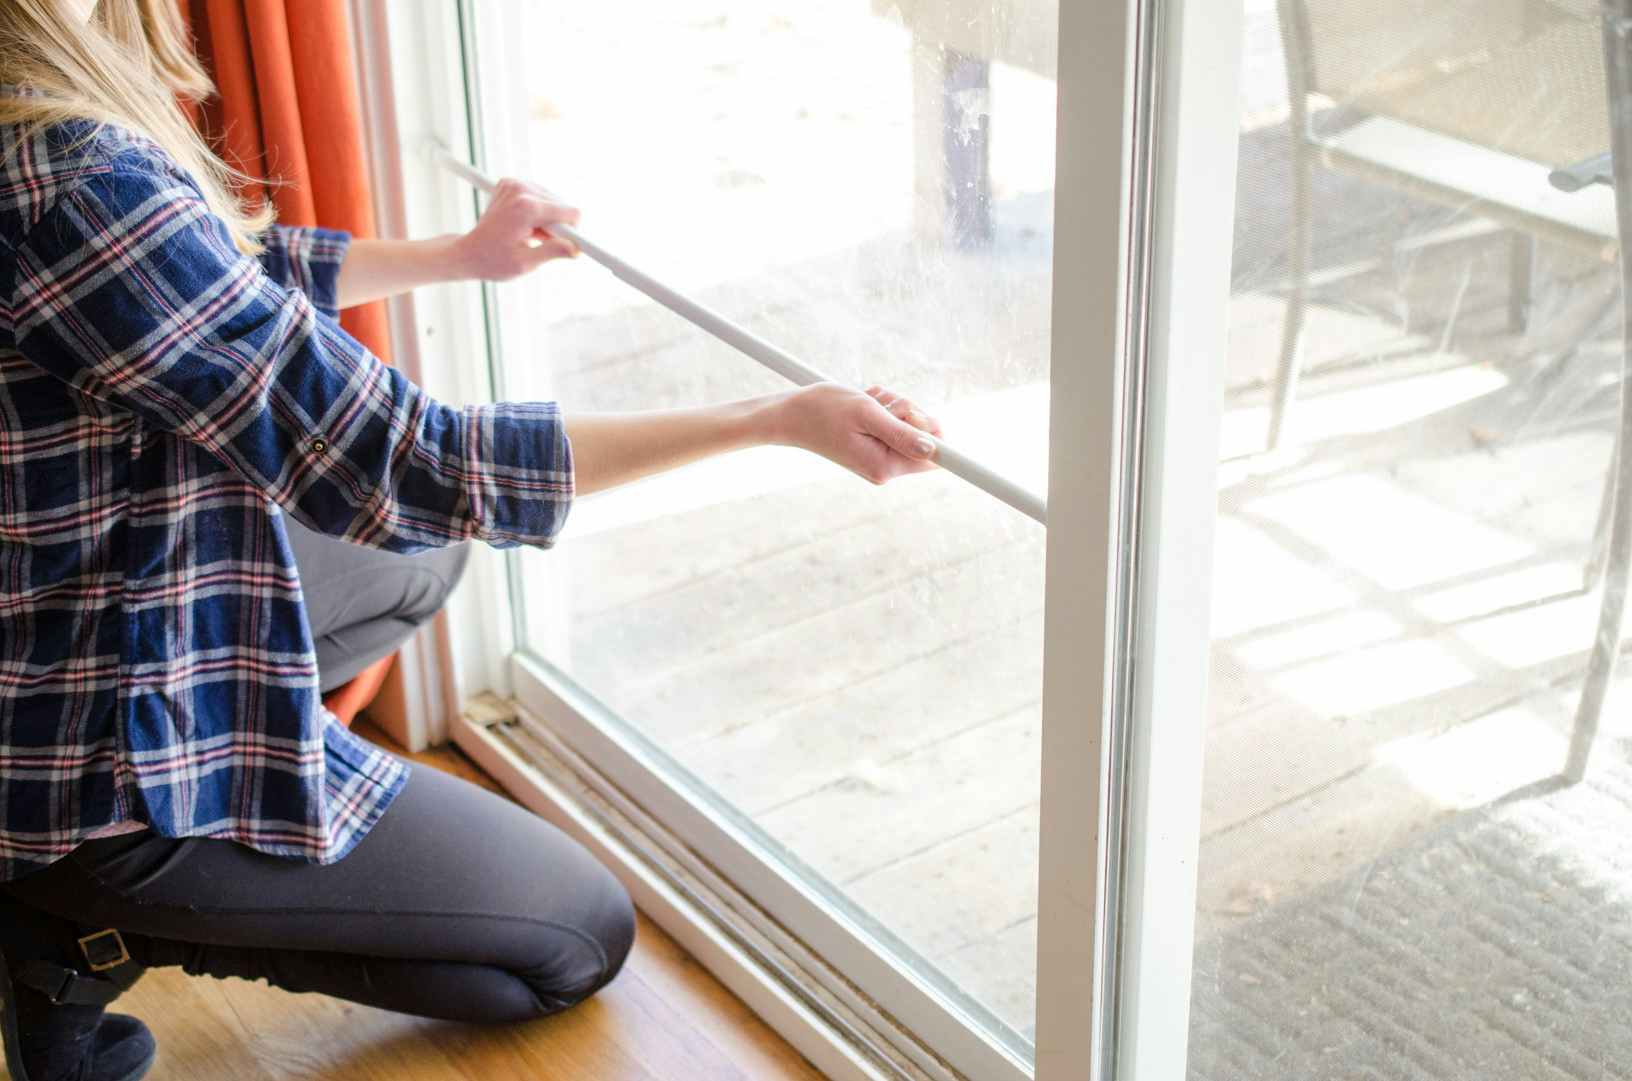 Prevent kids from getting out or someone from breaking in by placing a tension rod in your sliding door